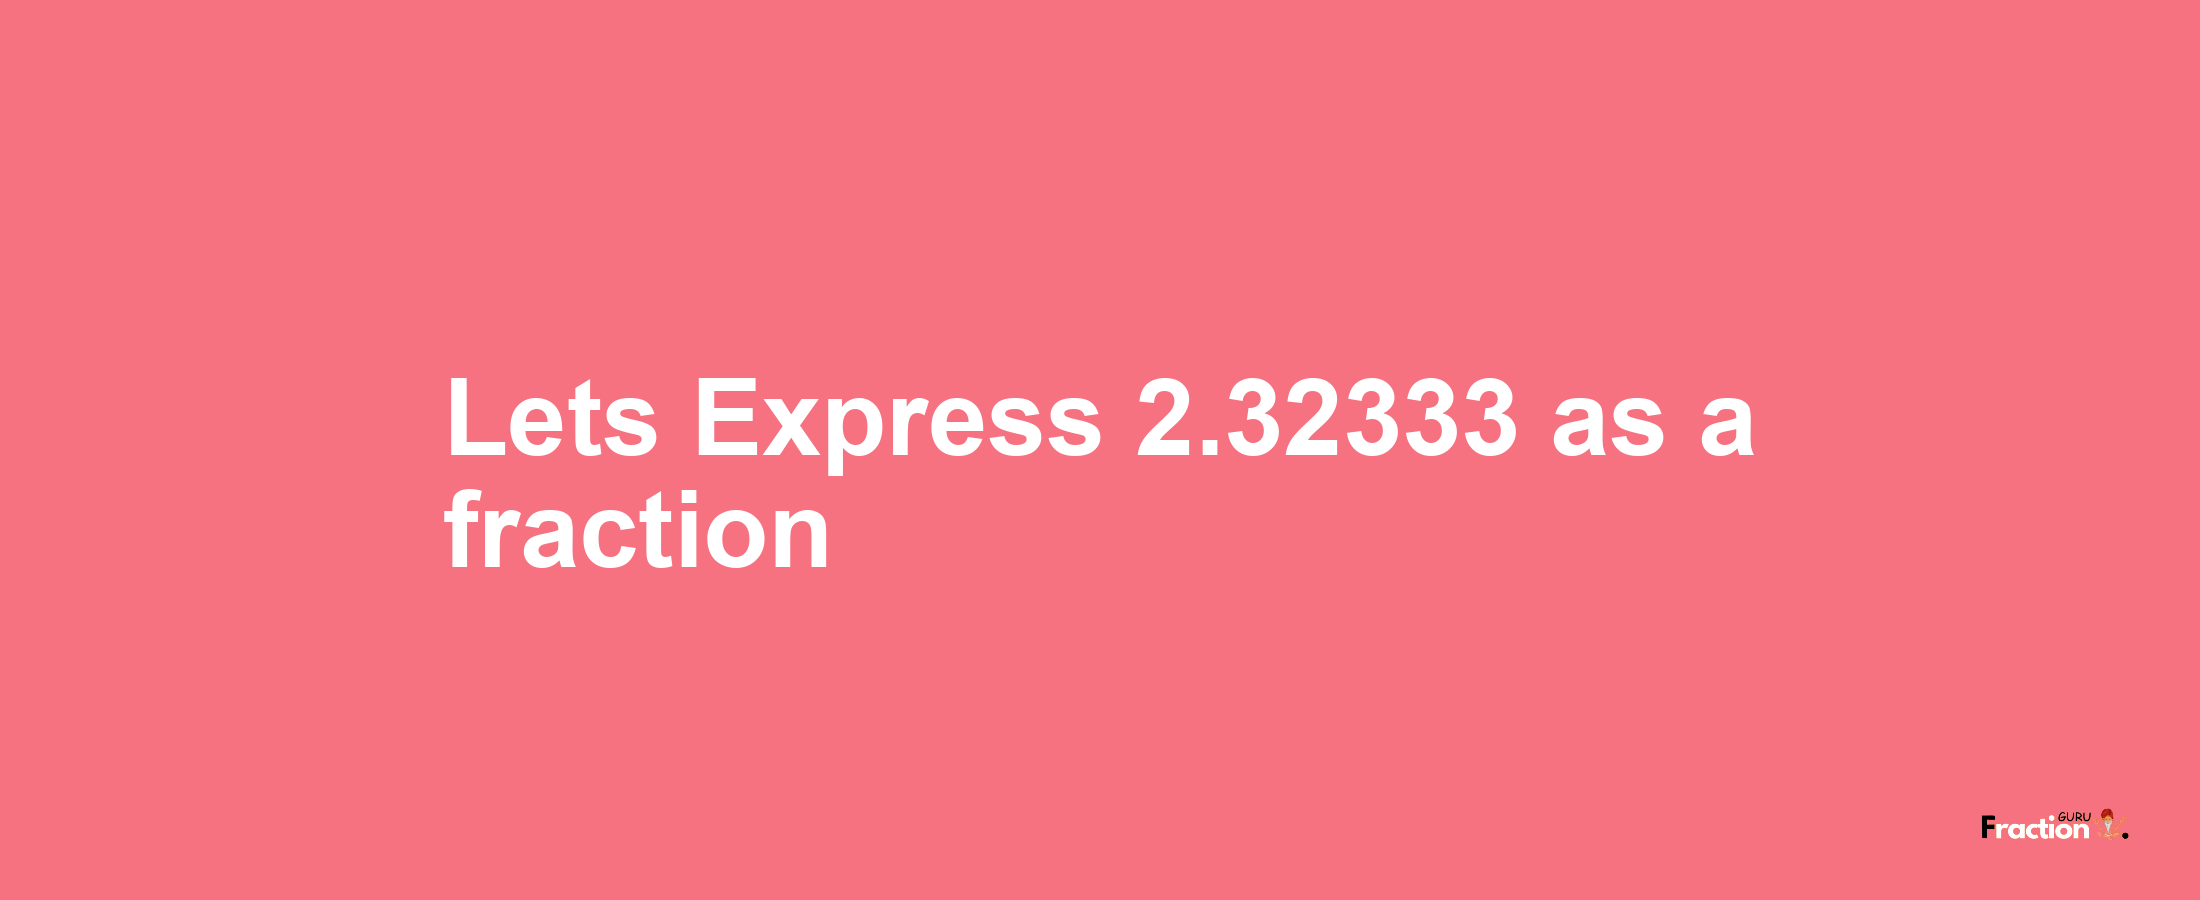 Lets Express 2.32333 as afraction